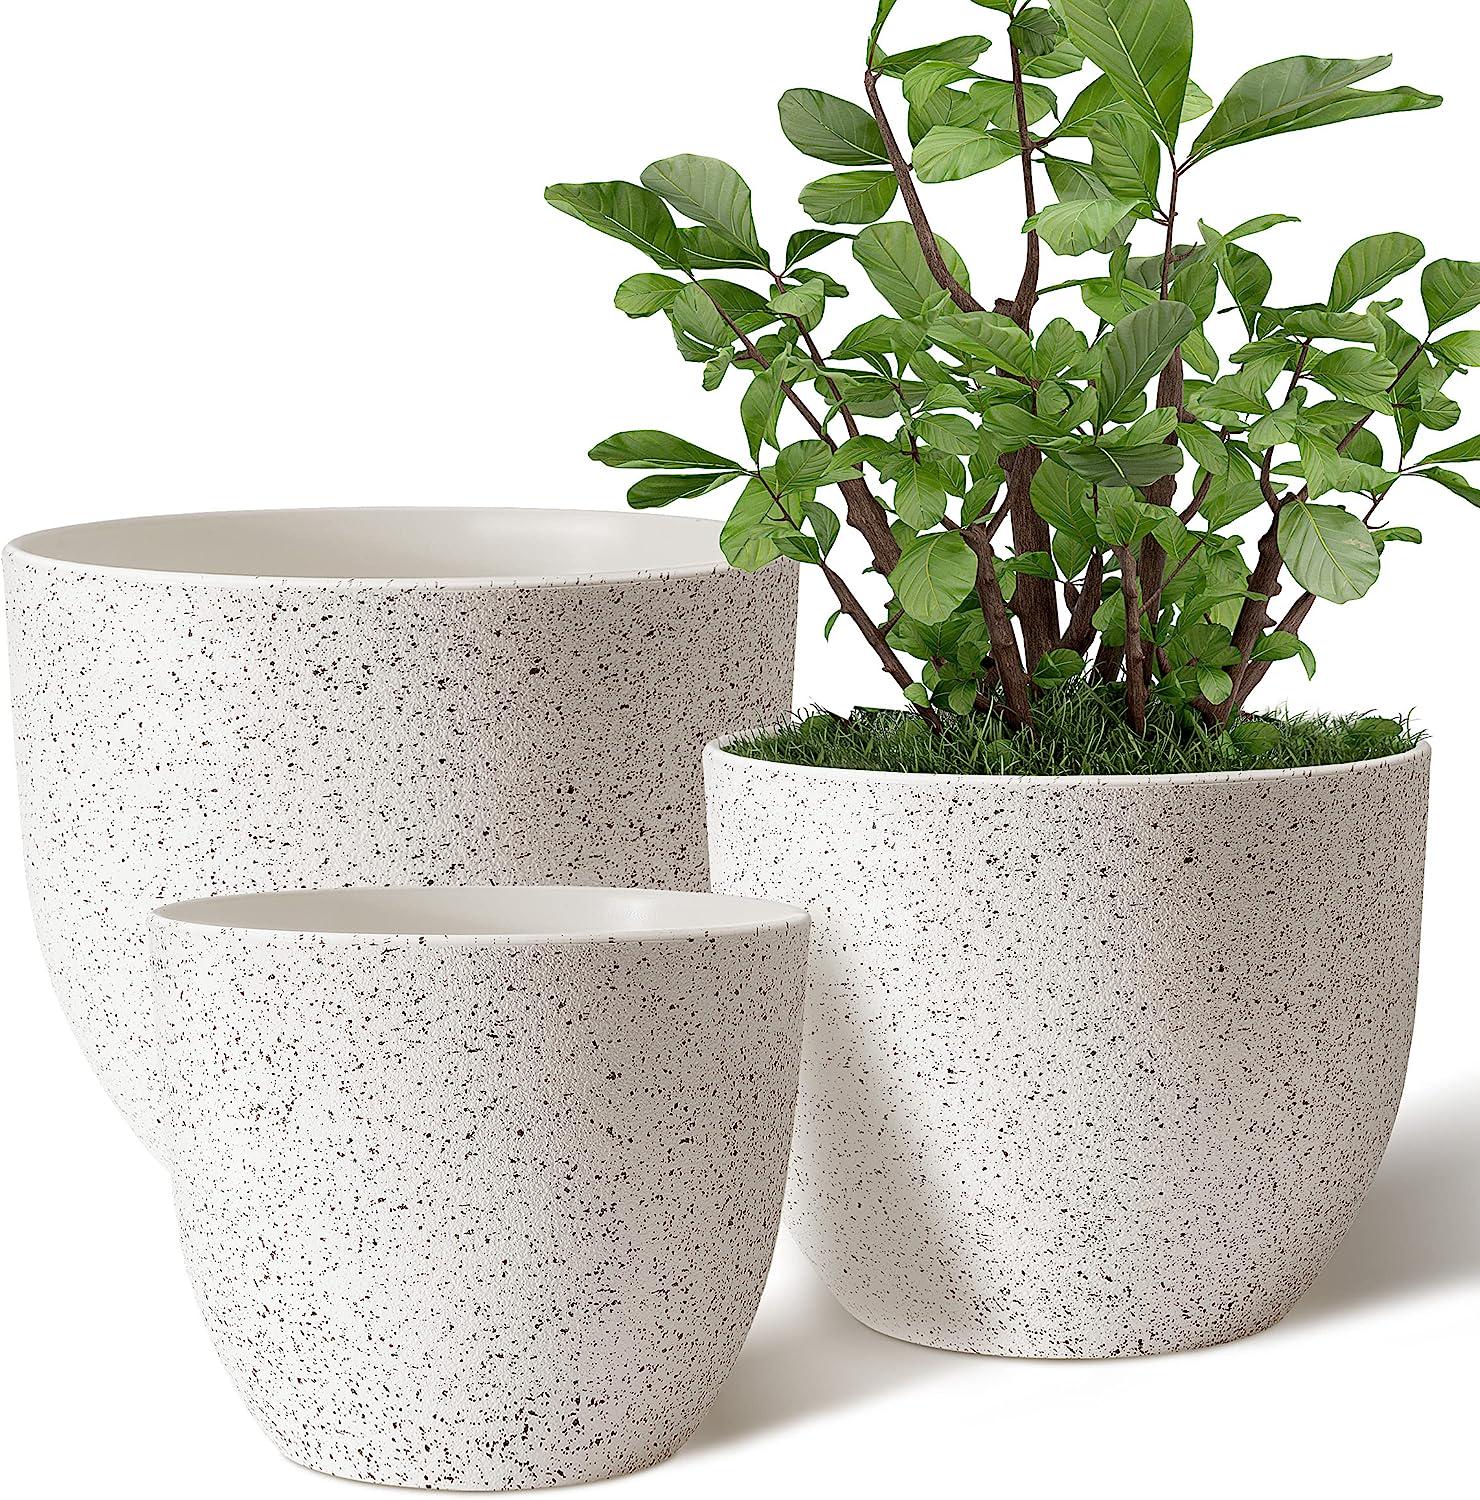 Giraffe Creation Plant Pots 10/9/8 inch Set of 3, Flower Pots Outdoor Indoor, Planters with Drainage Hole, Speckled White-